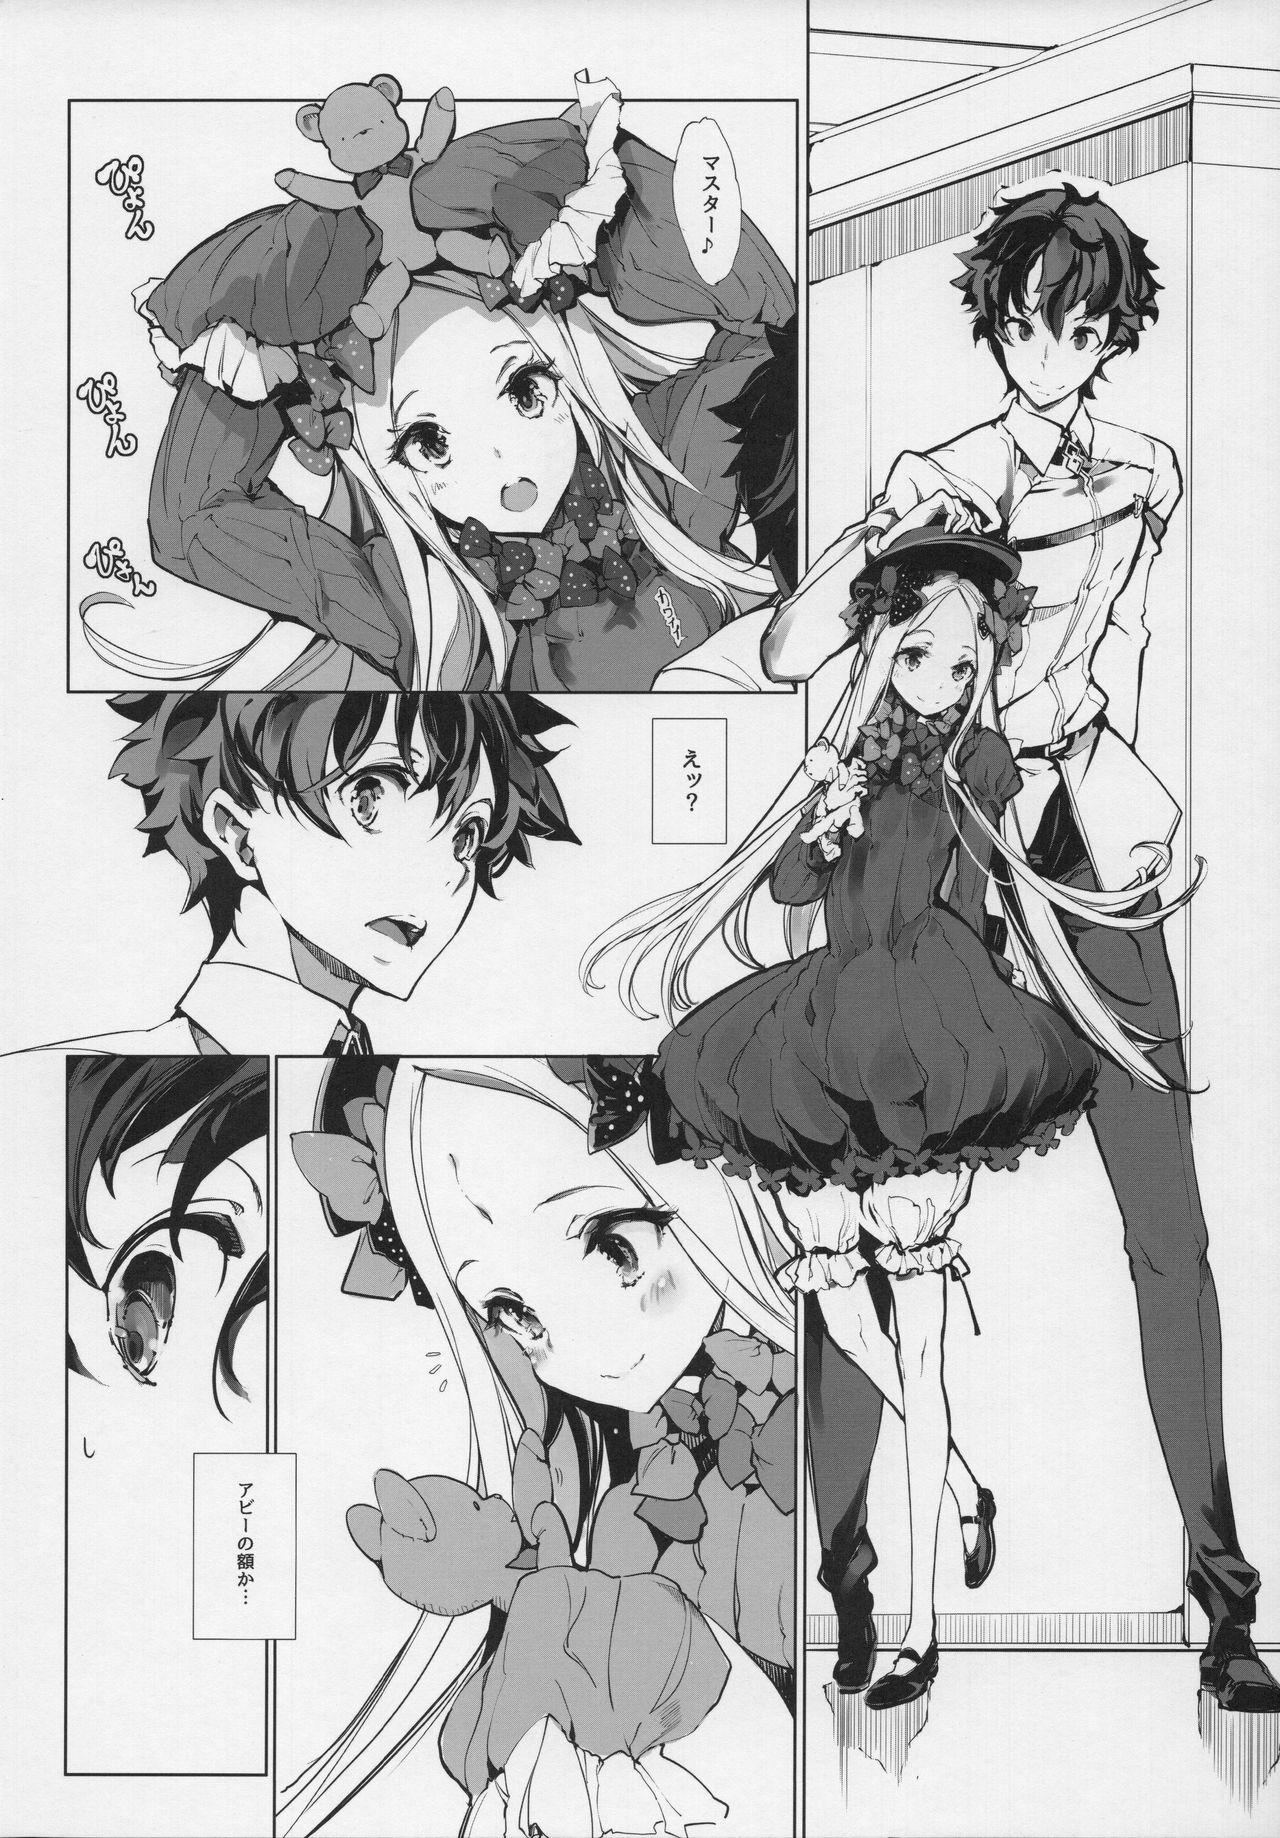 Tiny Tits Porn Sen no Ko o Haramu Mori no Shoujo - The girl of the woods with a thousand young - Fate grand order Cock Sucking - Page 3